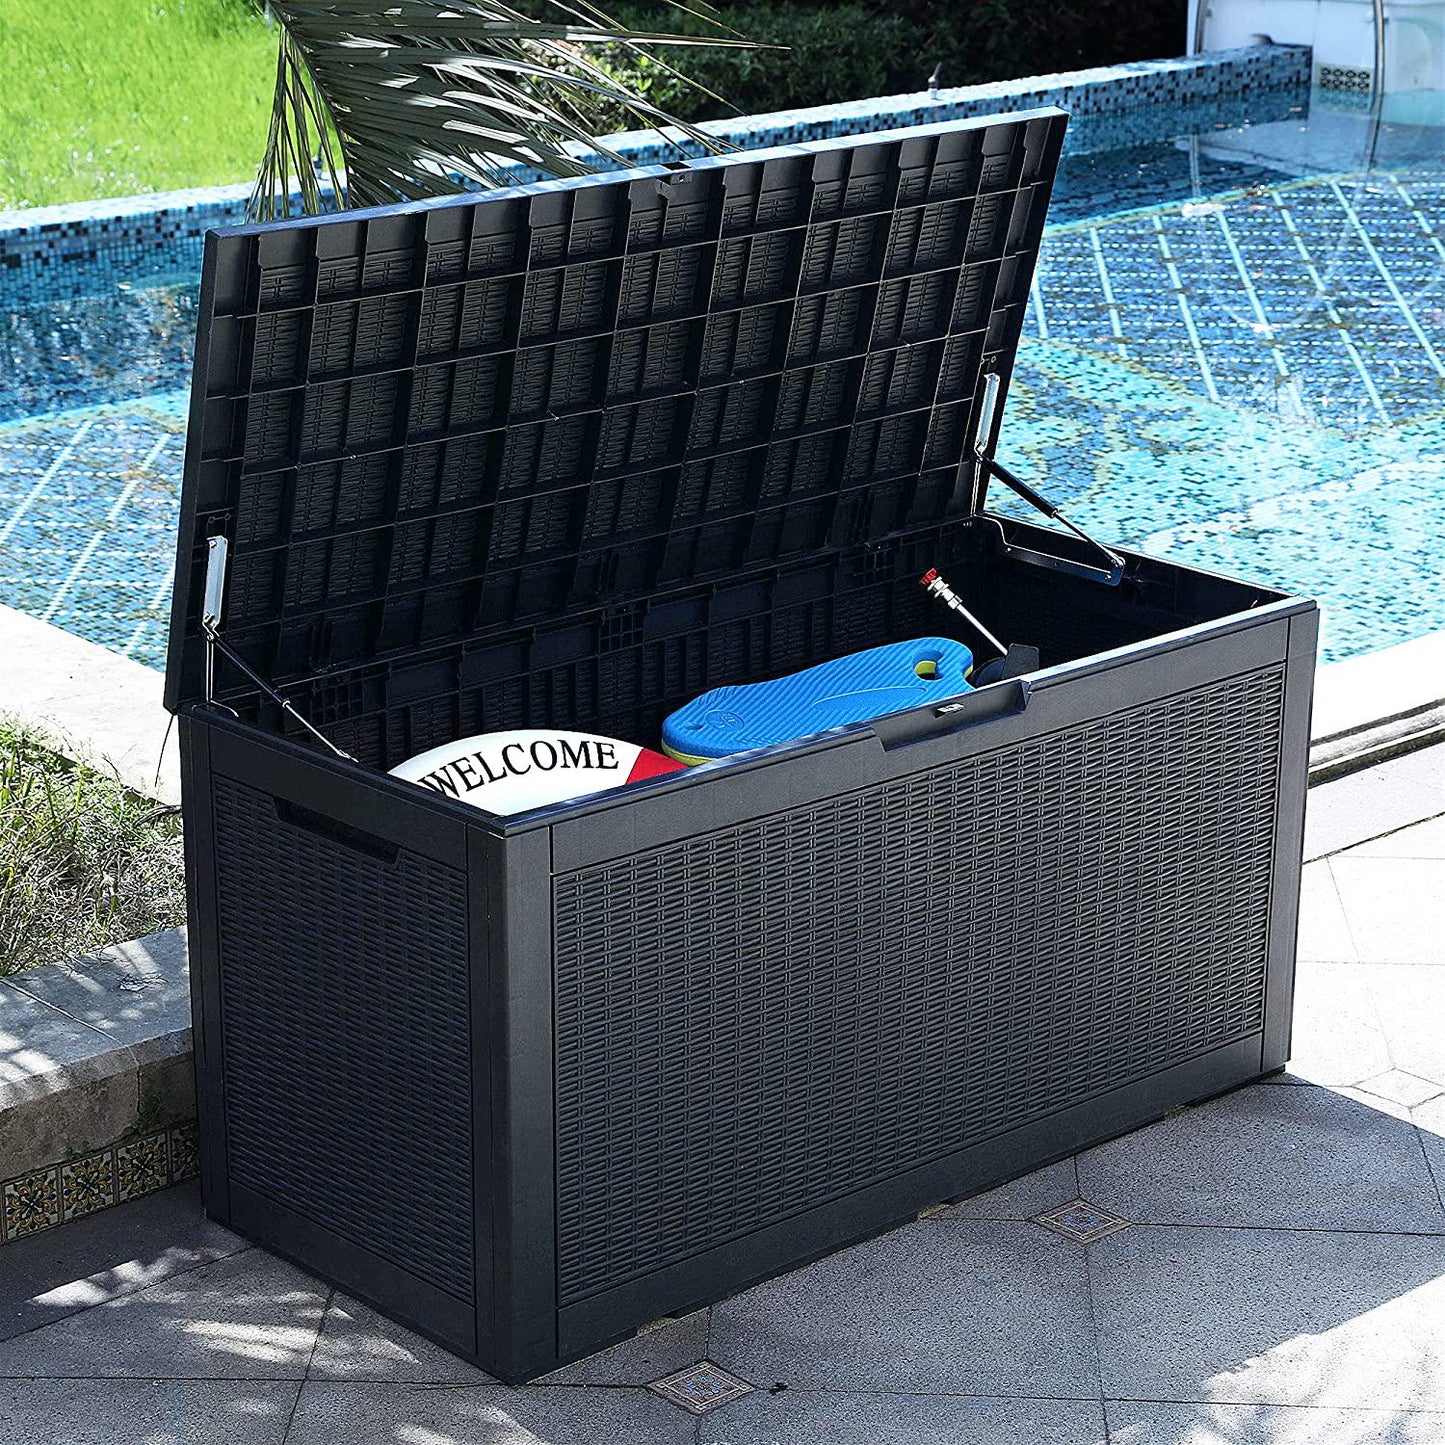 100 Gallon Large Resin Deck Box Outdoor Storage Boxes for Patio Furniture, Outdoor Cushions, Garden Tools and Pool Supplies-Waterproof,Lockable (Black)